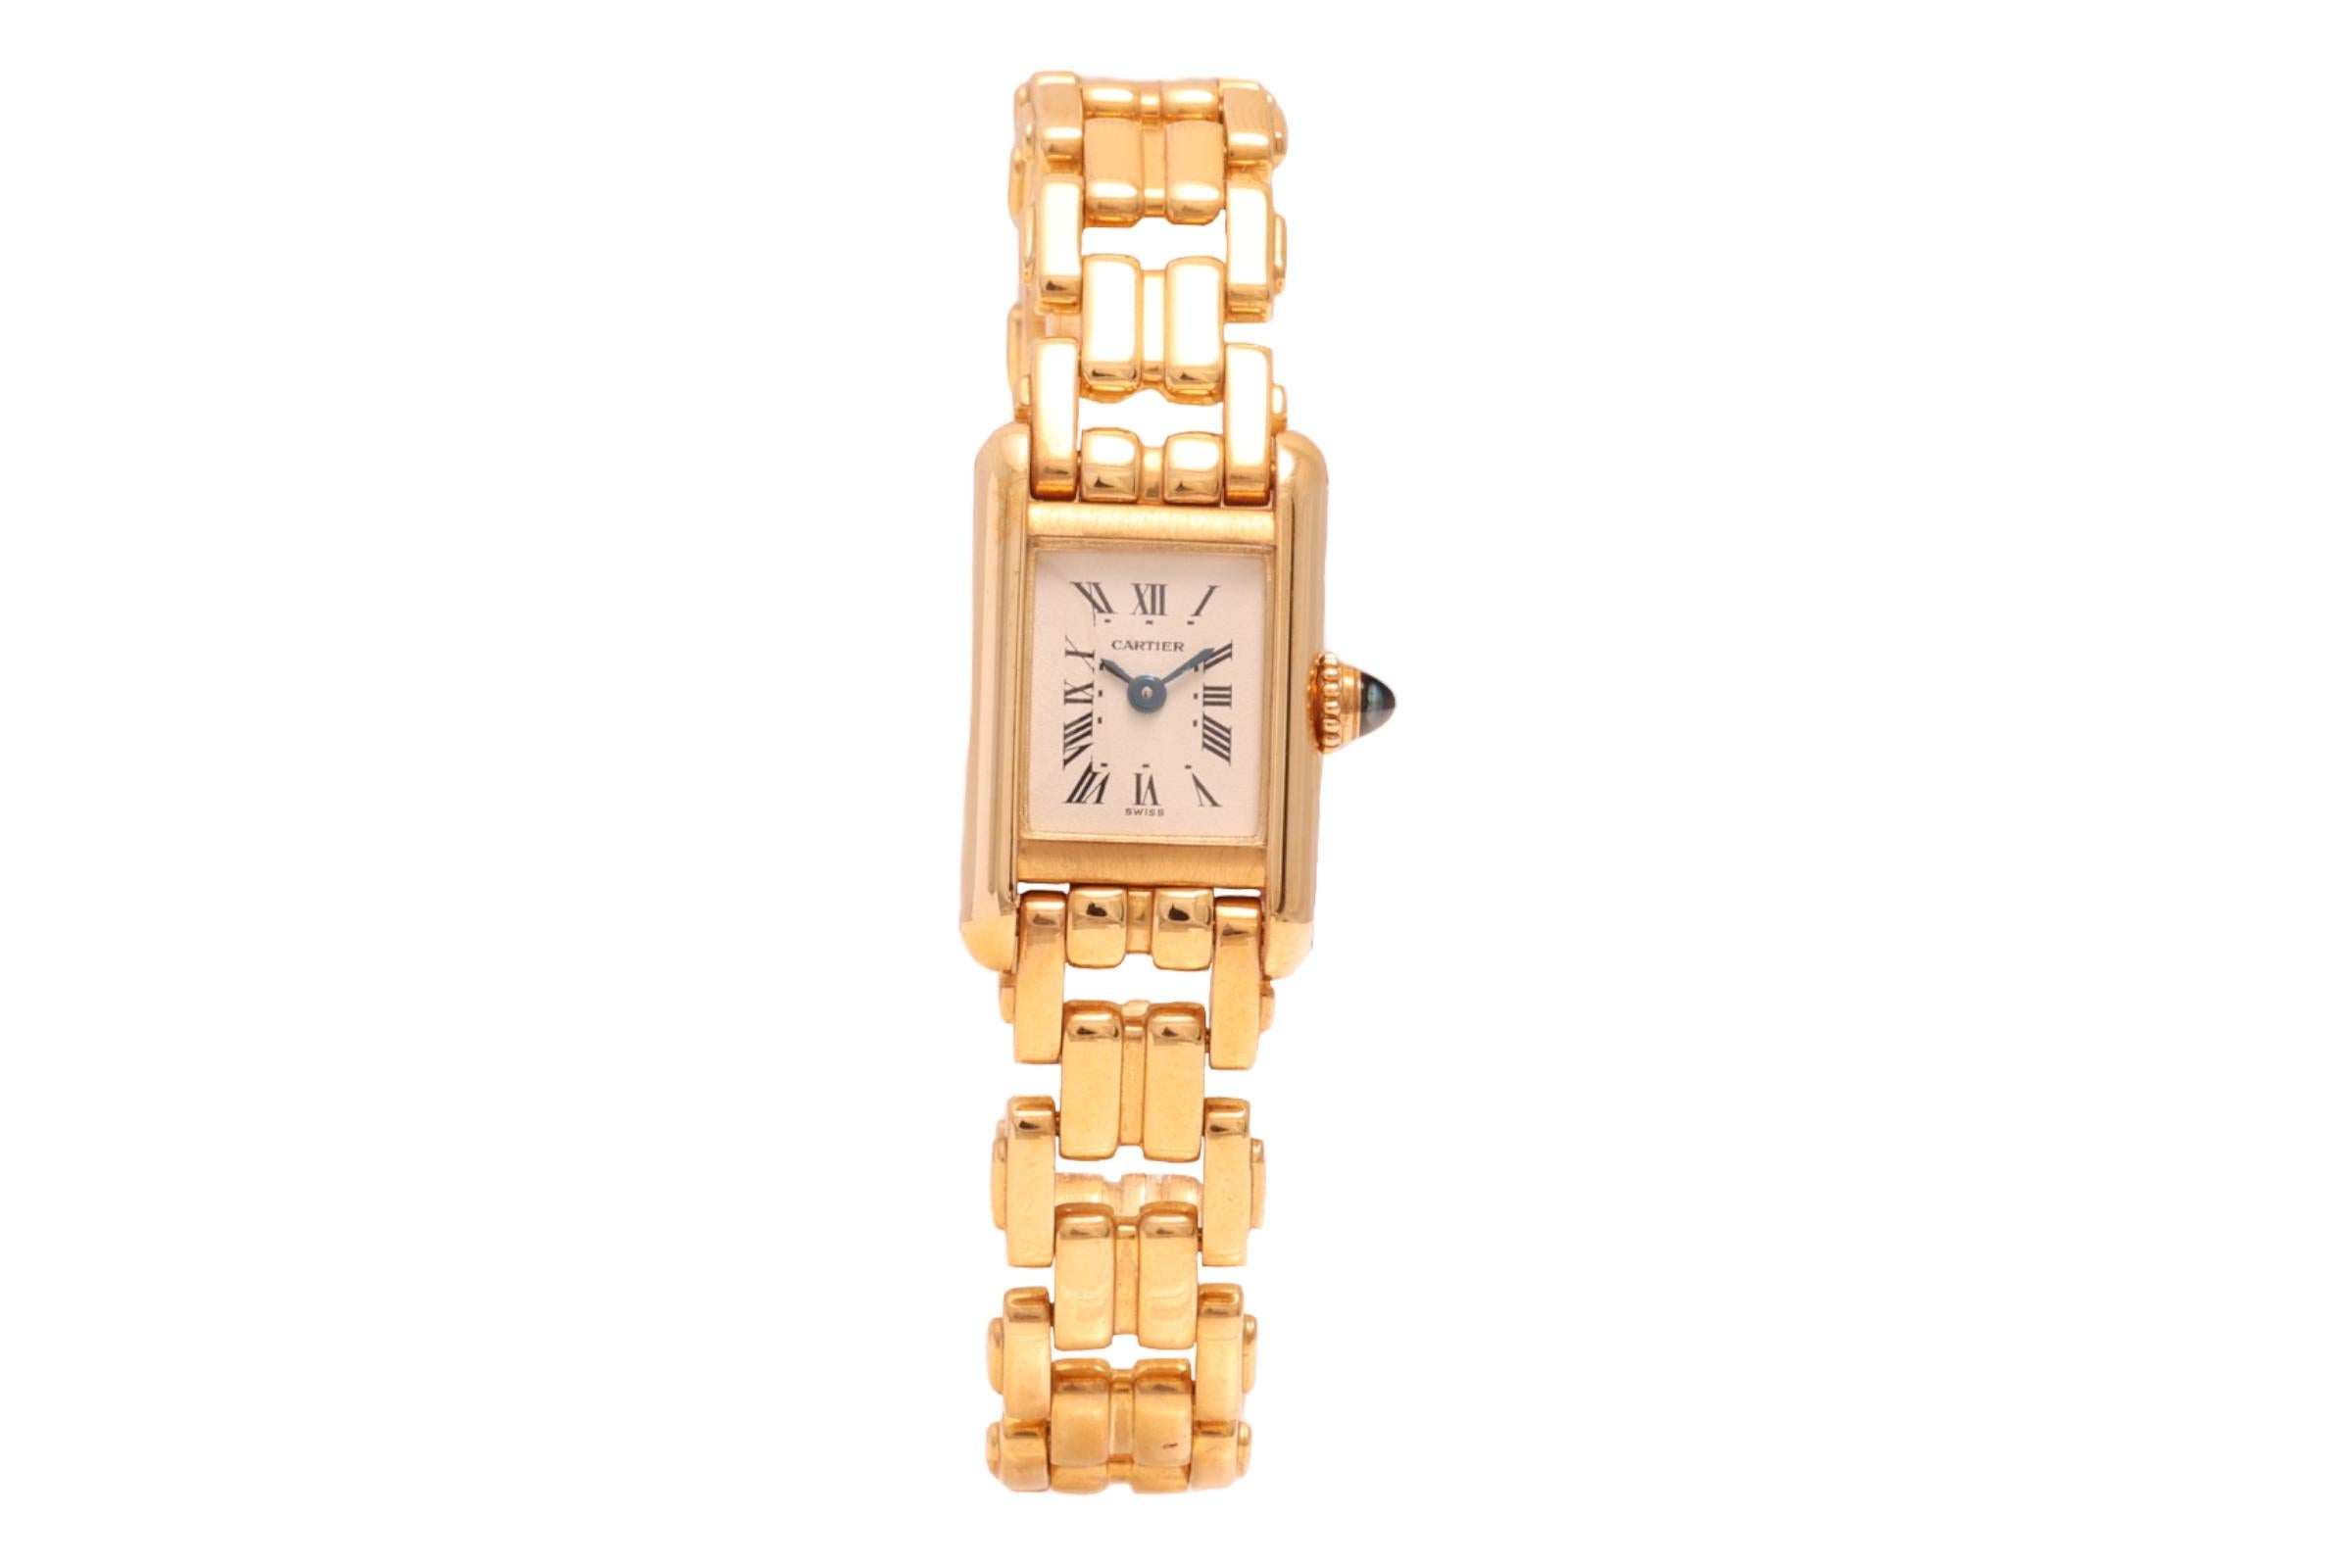 VERY CUTE AND COLLECTIBLE MINI SOLID 18 KT GOLD CARTIER PARIS WATCH

MOVEMENT: quartz

FUNCTIONS: hours, minutes

CASE: 18 kt yellow gold, diameter 15.5 mm x 24.1 mm, mineral glass, back secured with 4 screws, regular crown with cabuchon